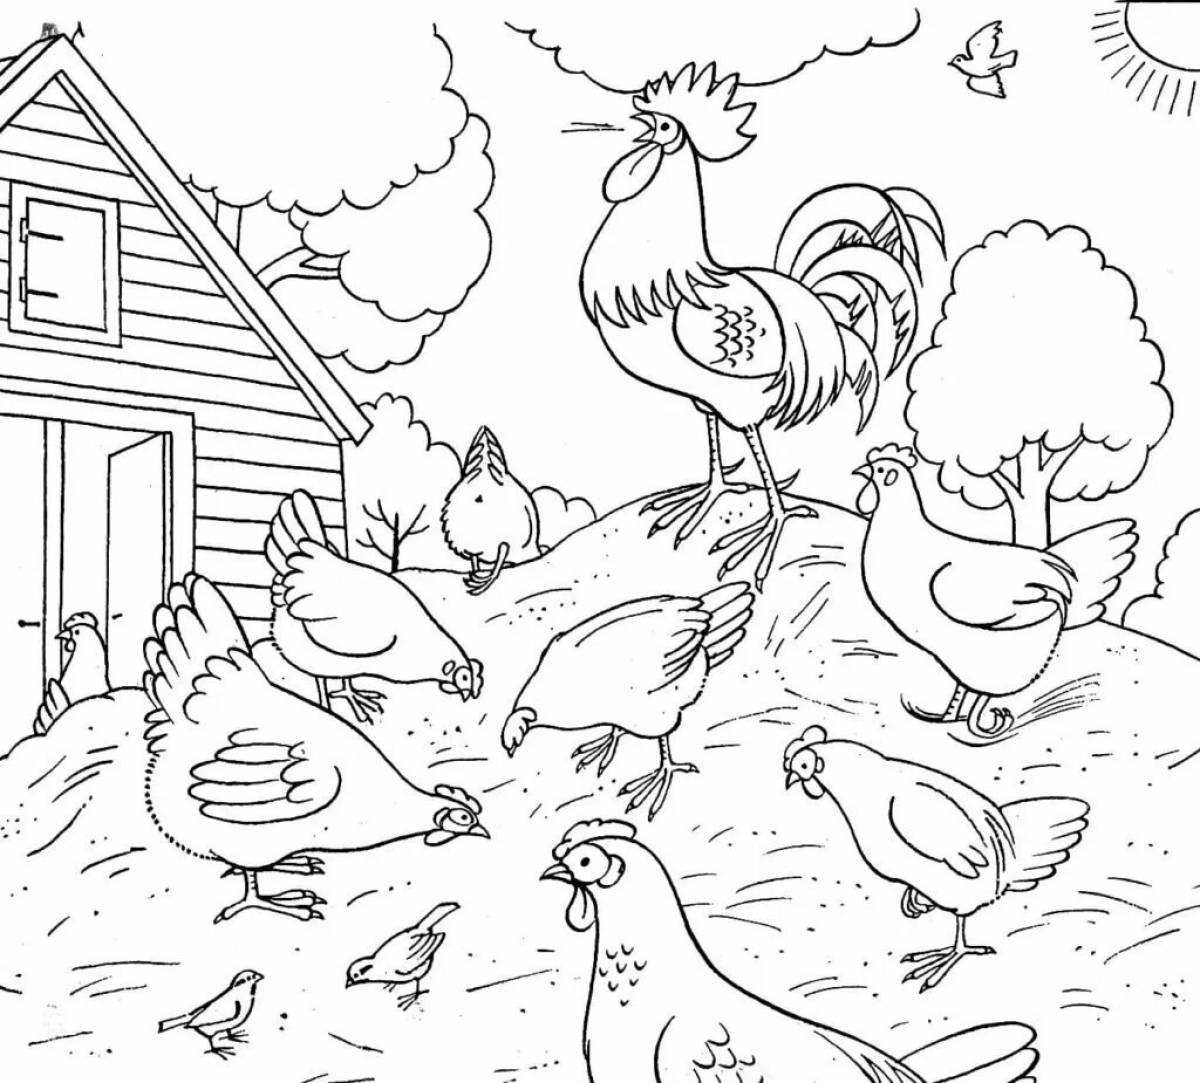 Awesome bird coloring page for 5-6 year olds